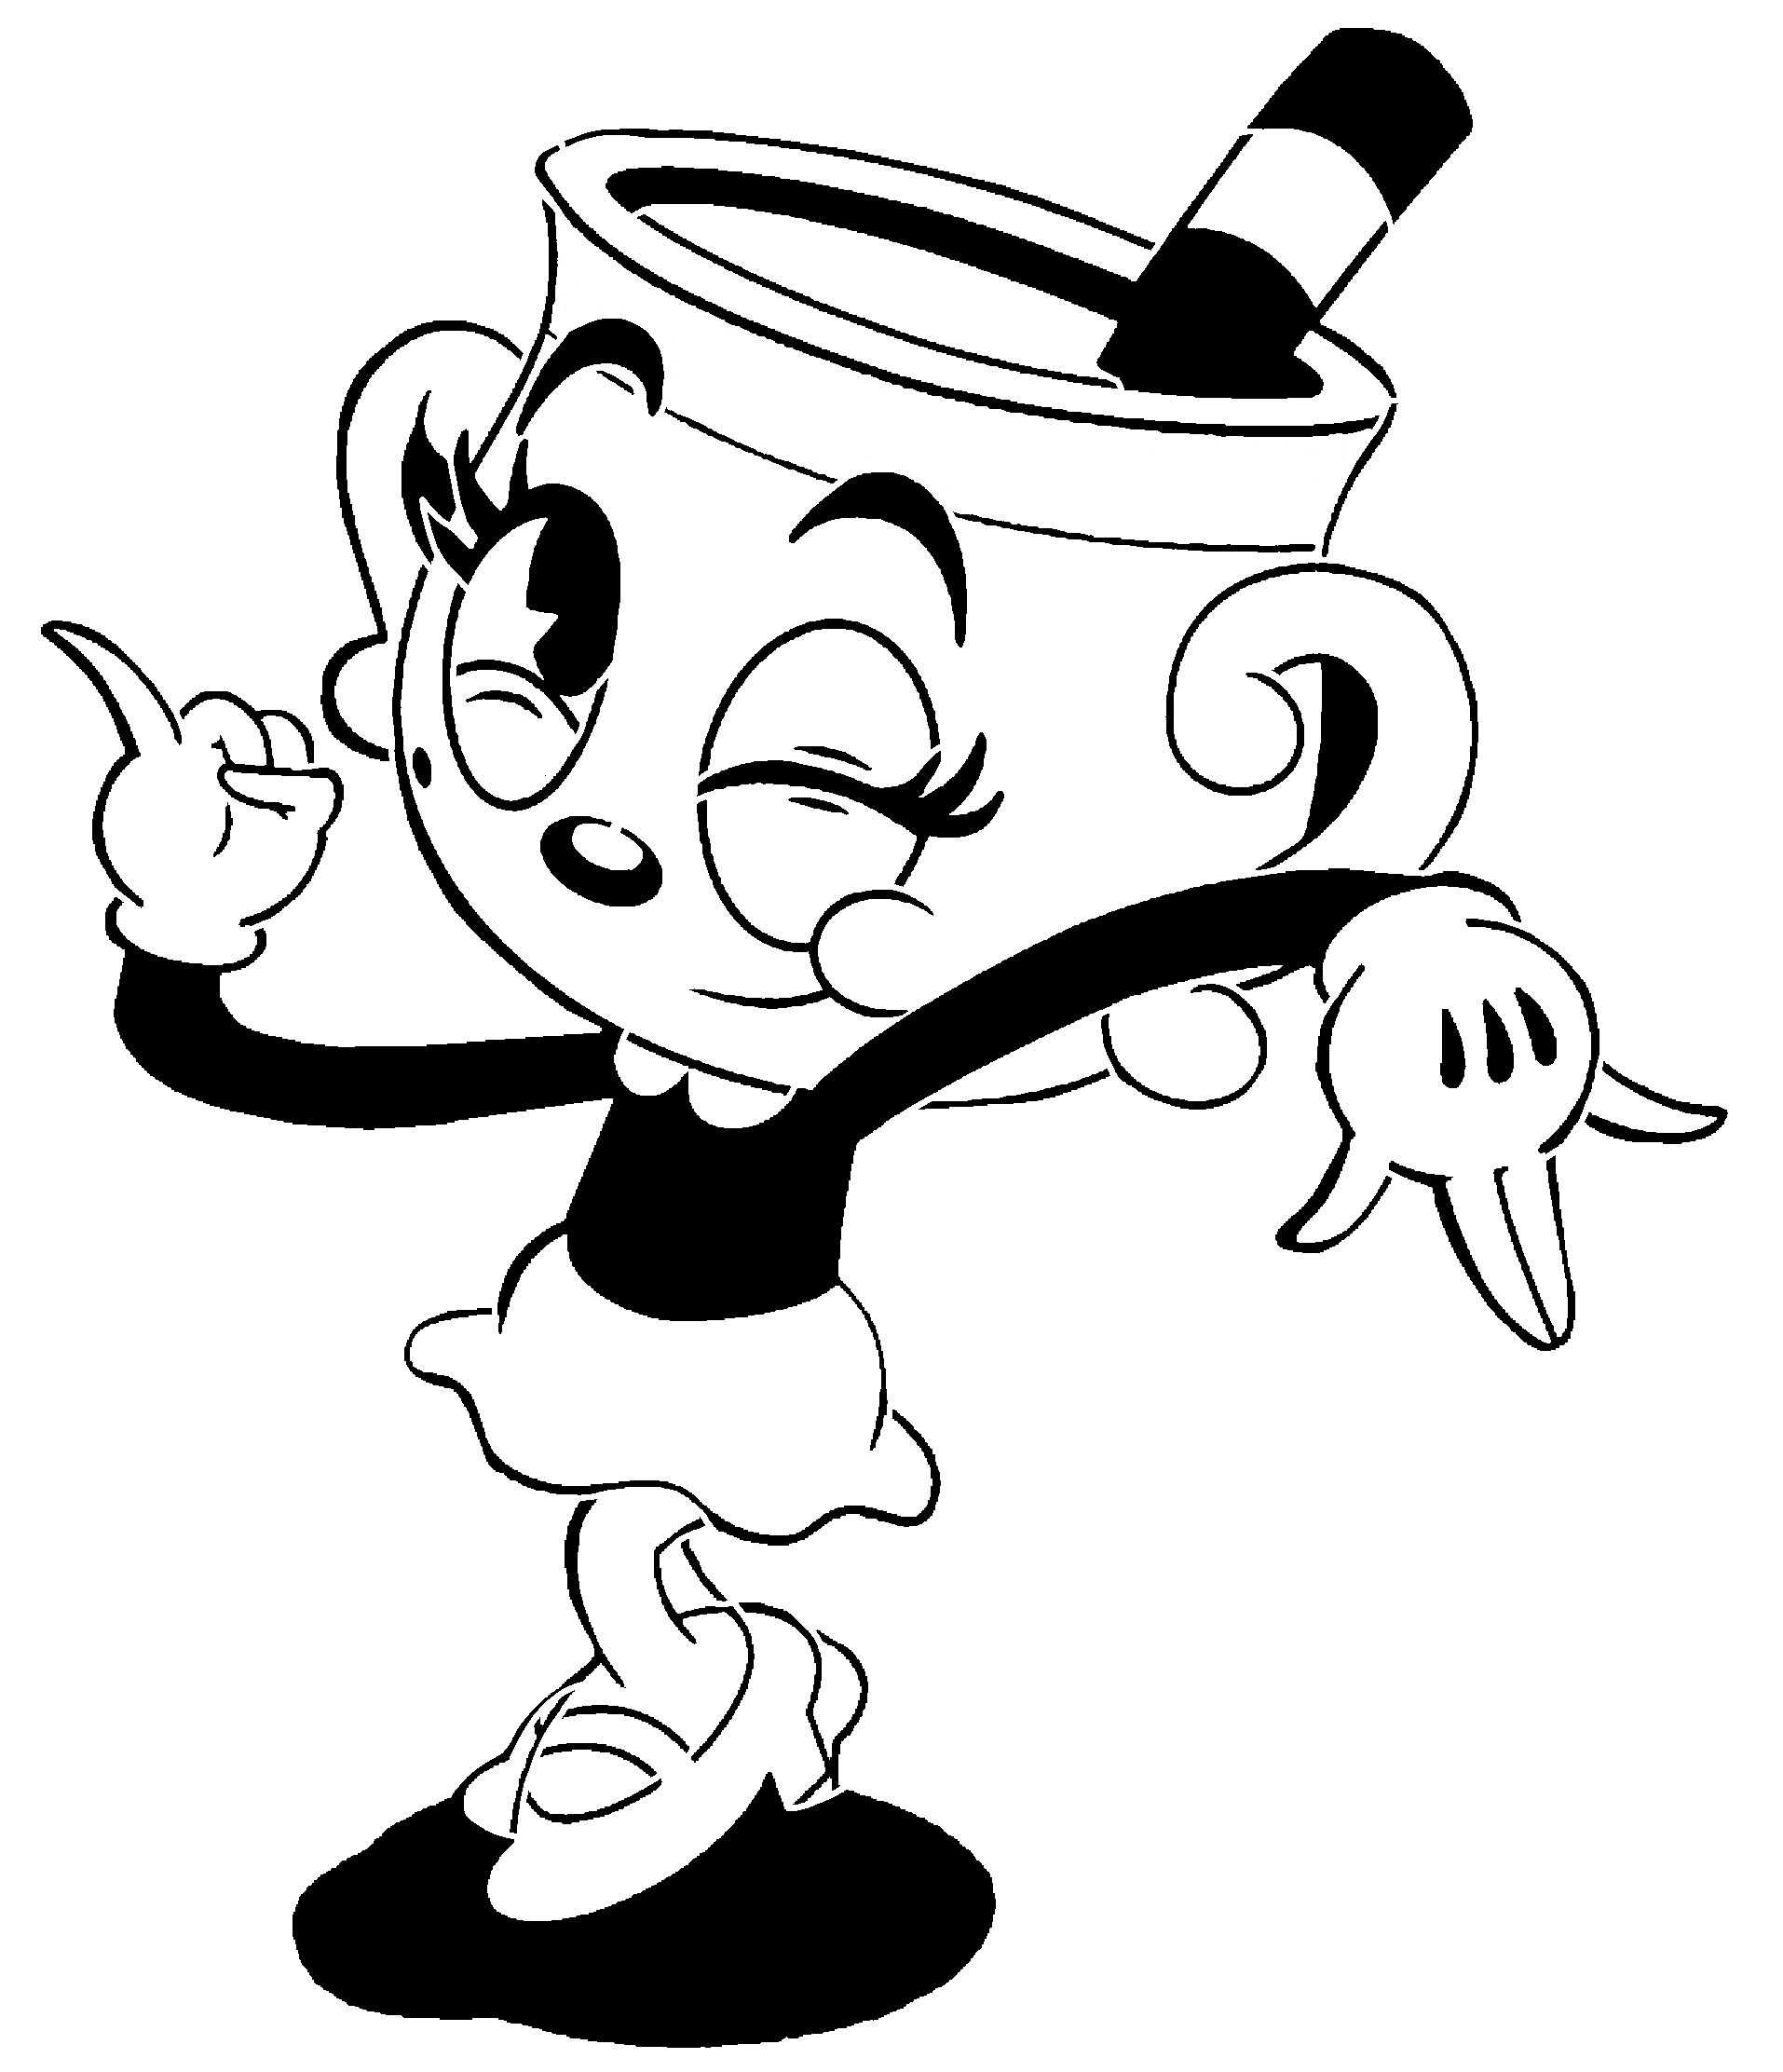 The Cuphead Show Ms Chalice Clipart Svg Pdf (Instant Download) 